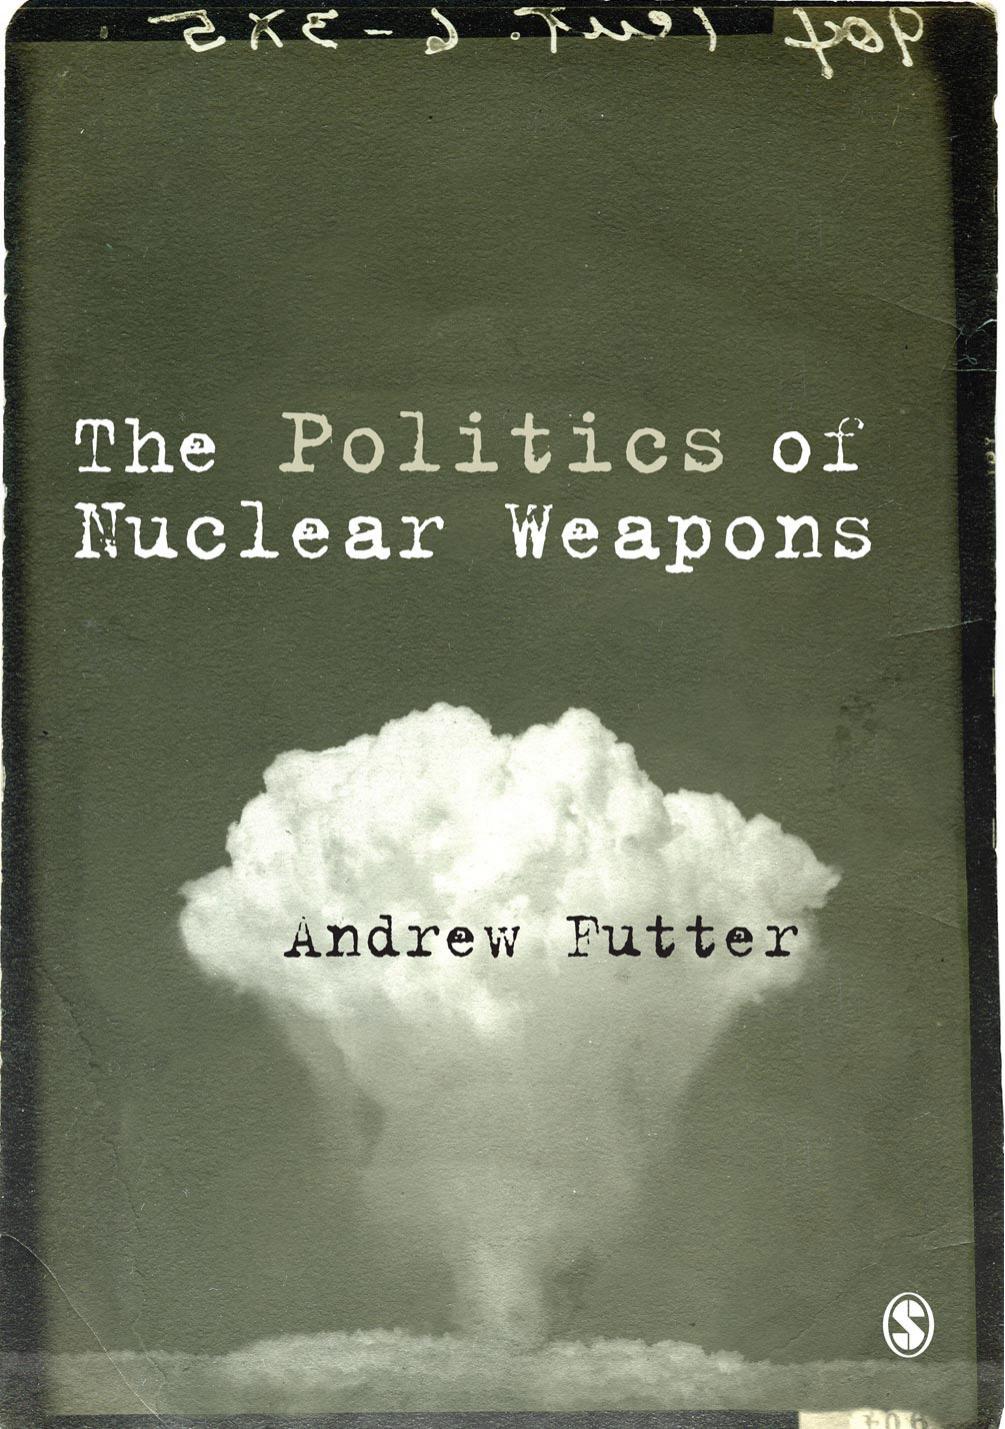 The Politics of Nuclear Weapons by Andrew Futter